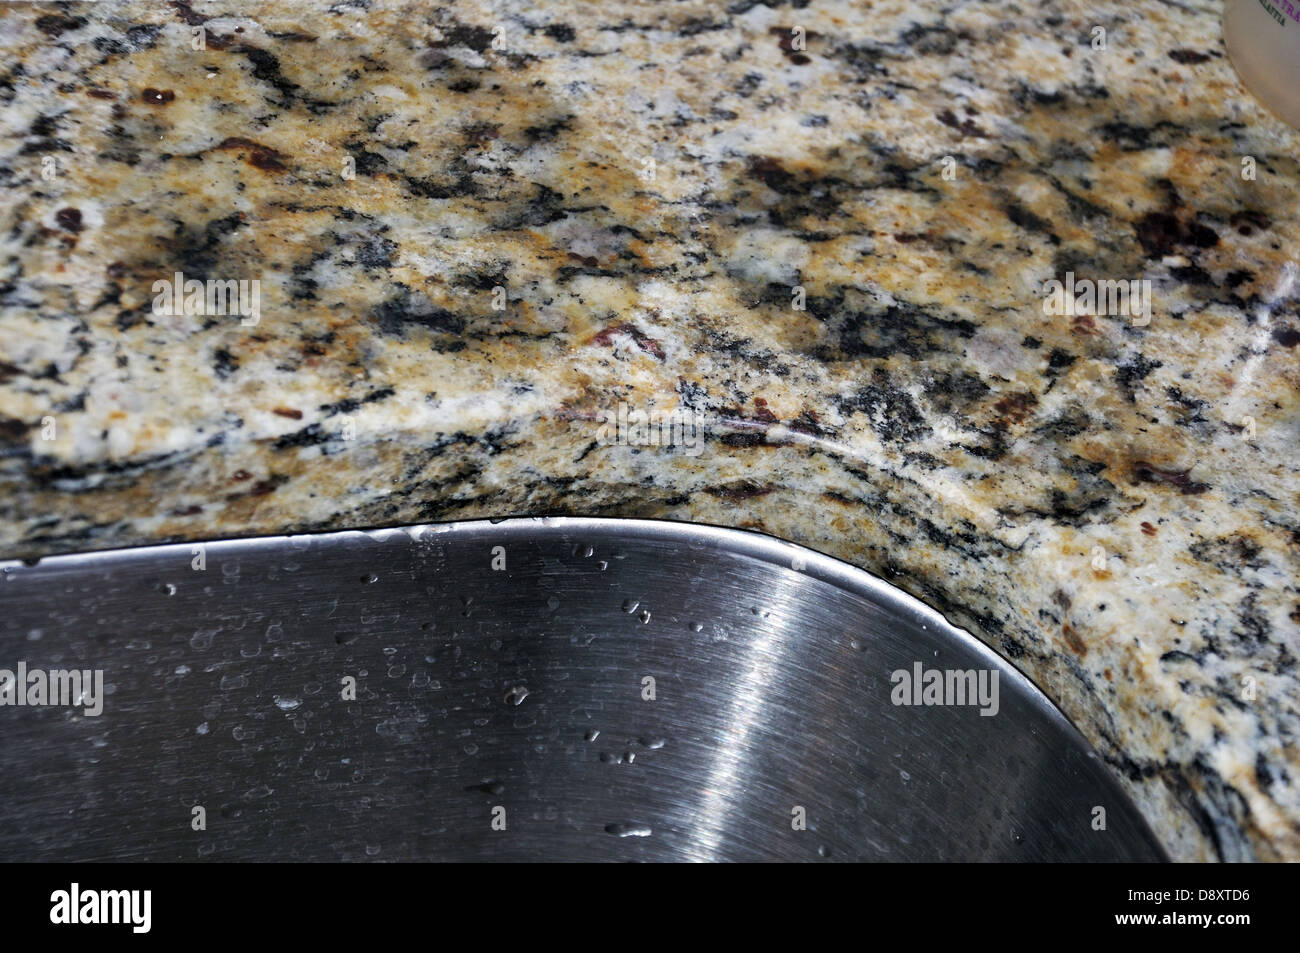 Stains From Water Absorbed By Granite Countertop Over The